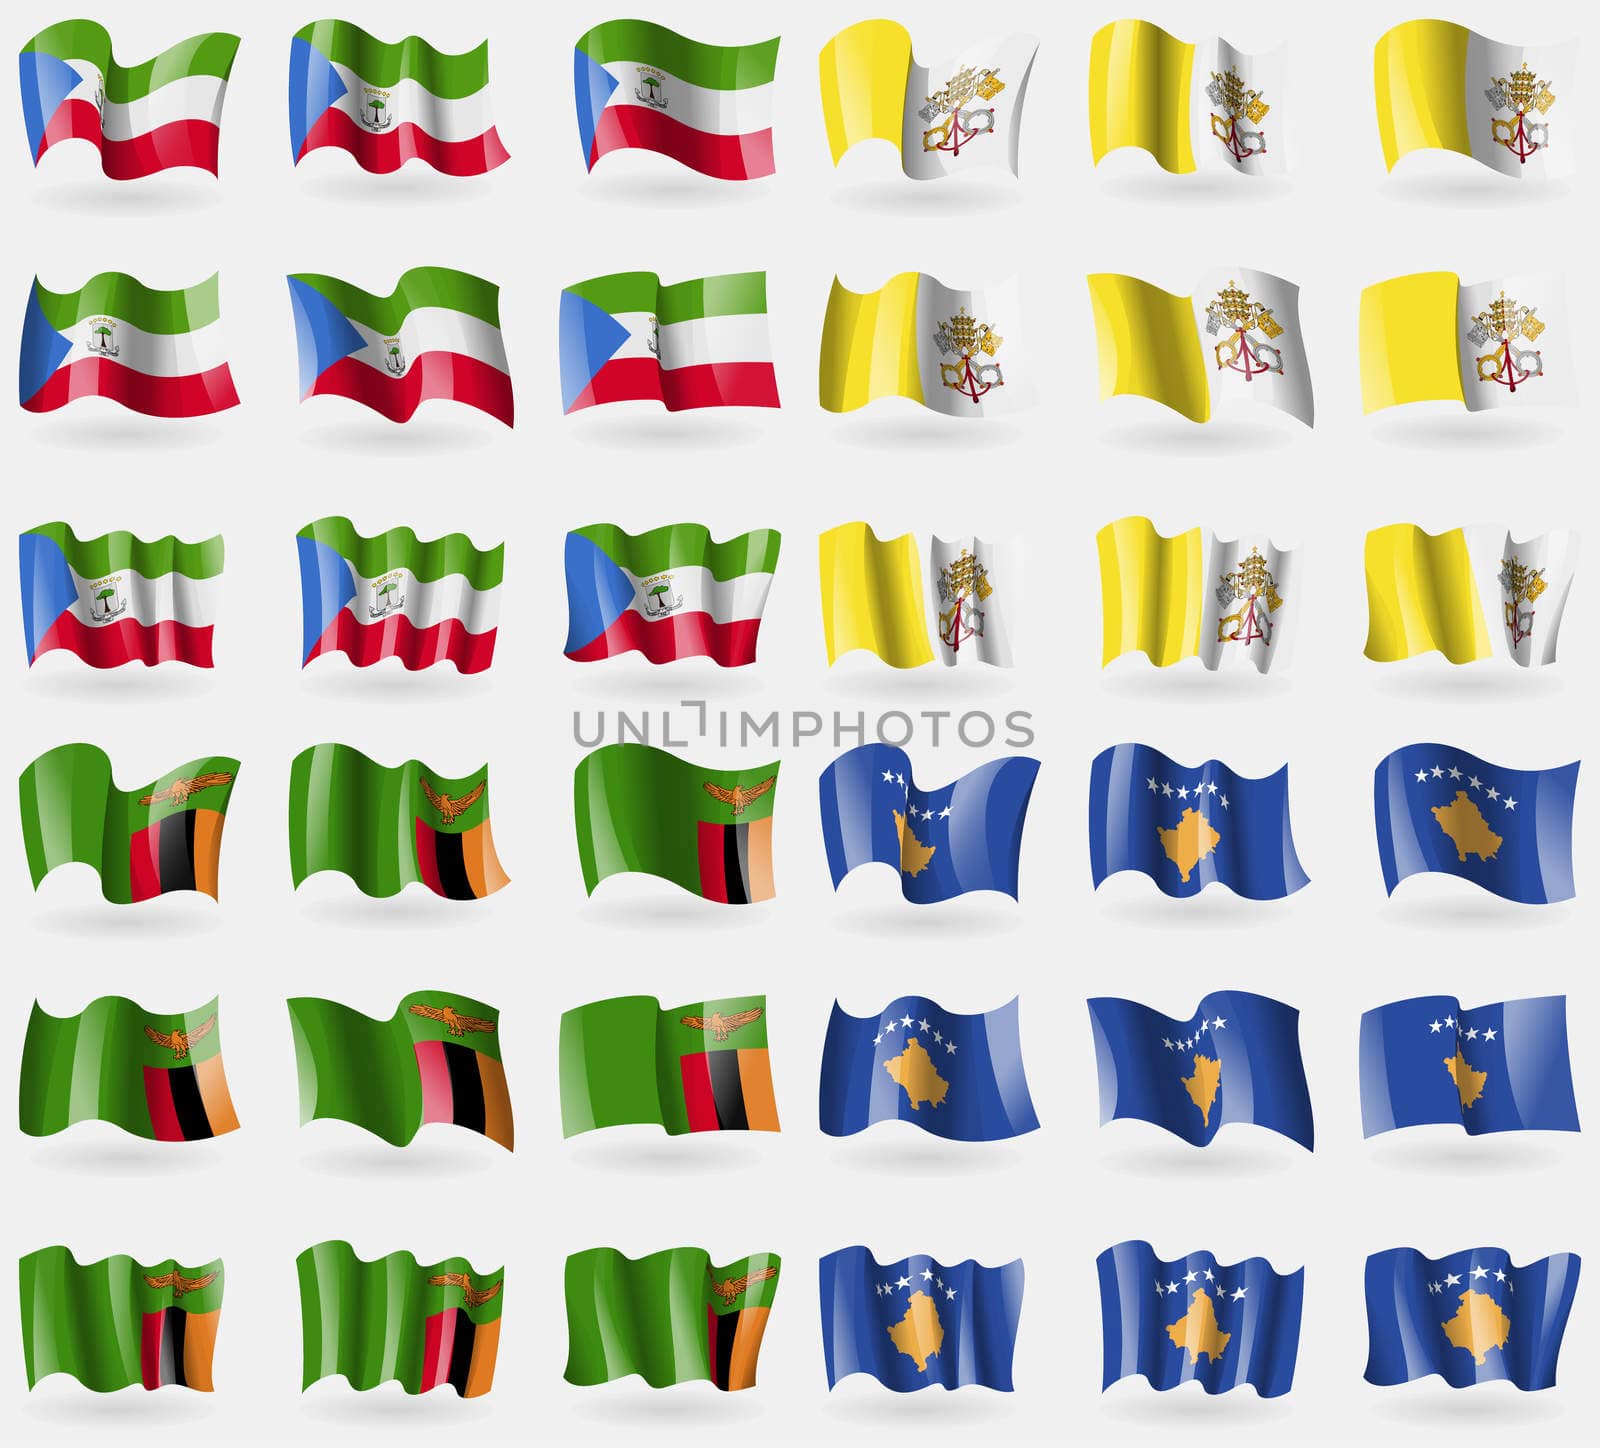 Equatorial Guinea, Vatican CityHoly See, Zambia, Kosovo. Set of 36 flags of the countries of the world.  by serhii_lohvyniuk